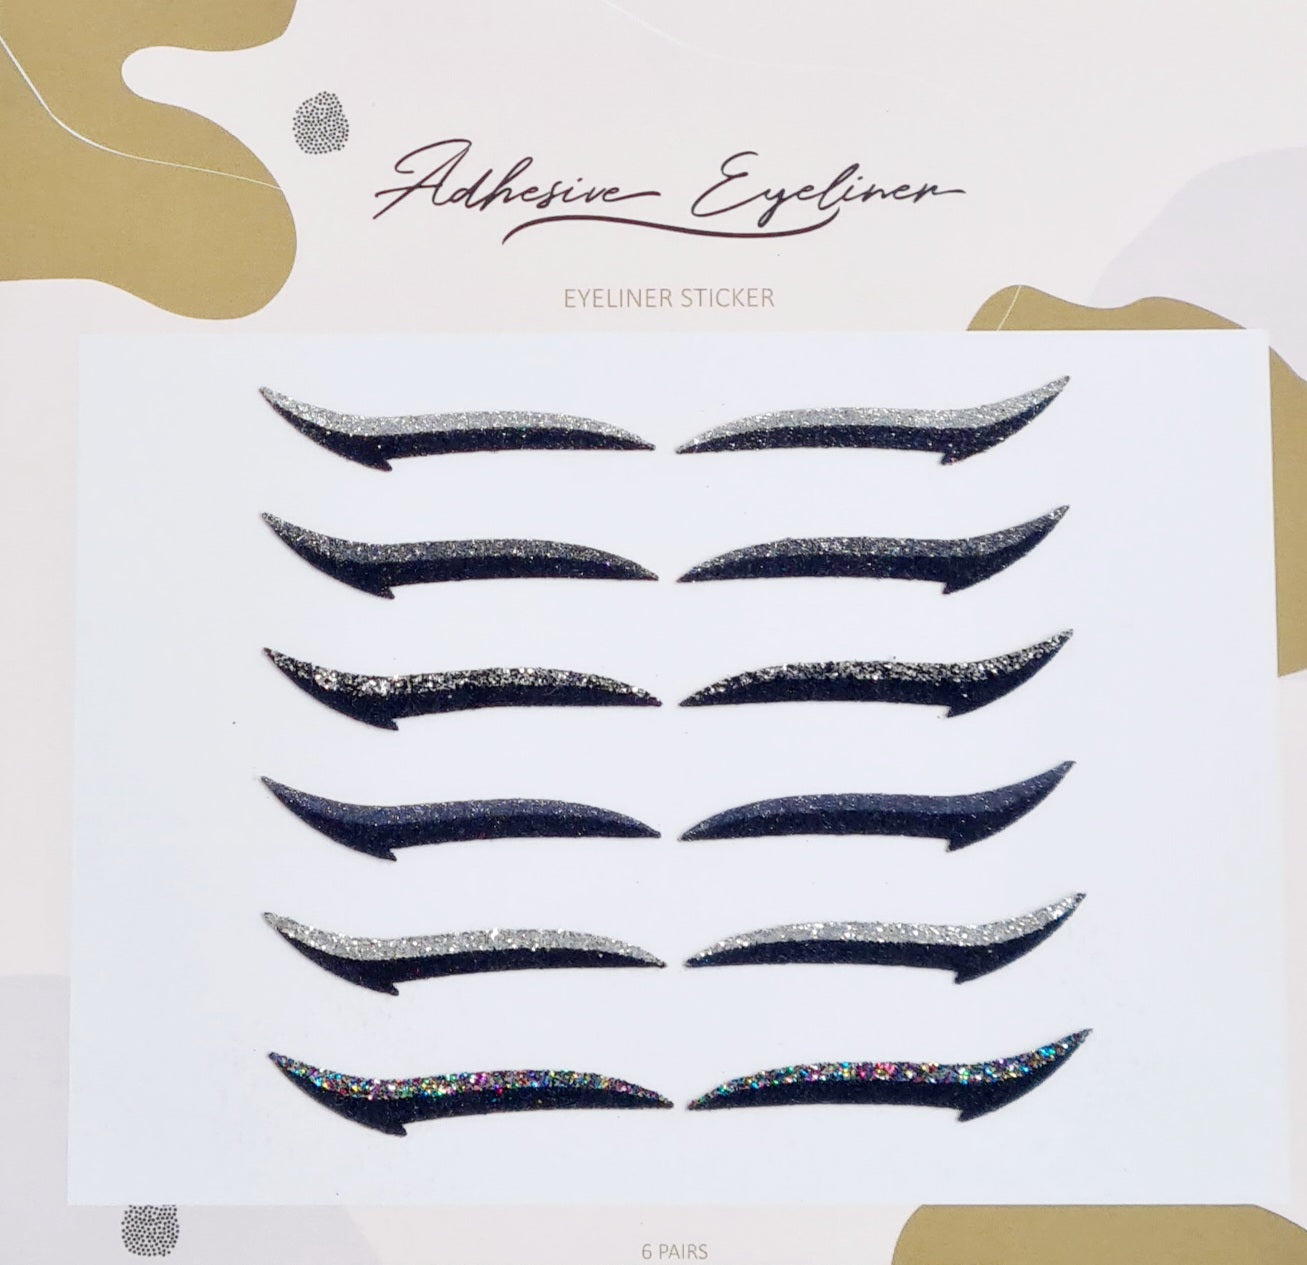 Eyeliner Sticker Classic Shades of Silver - 6 pairs